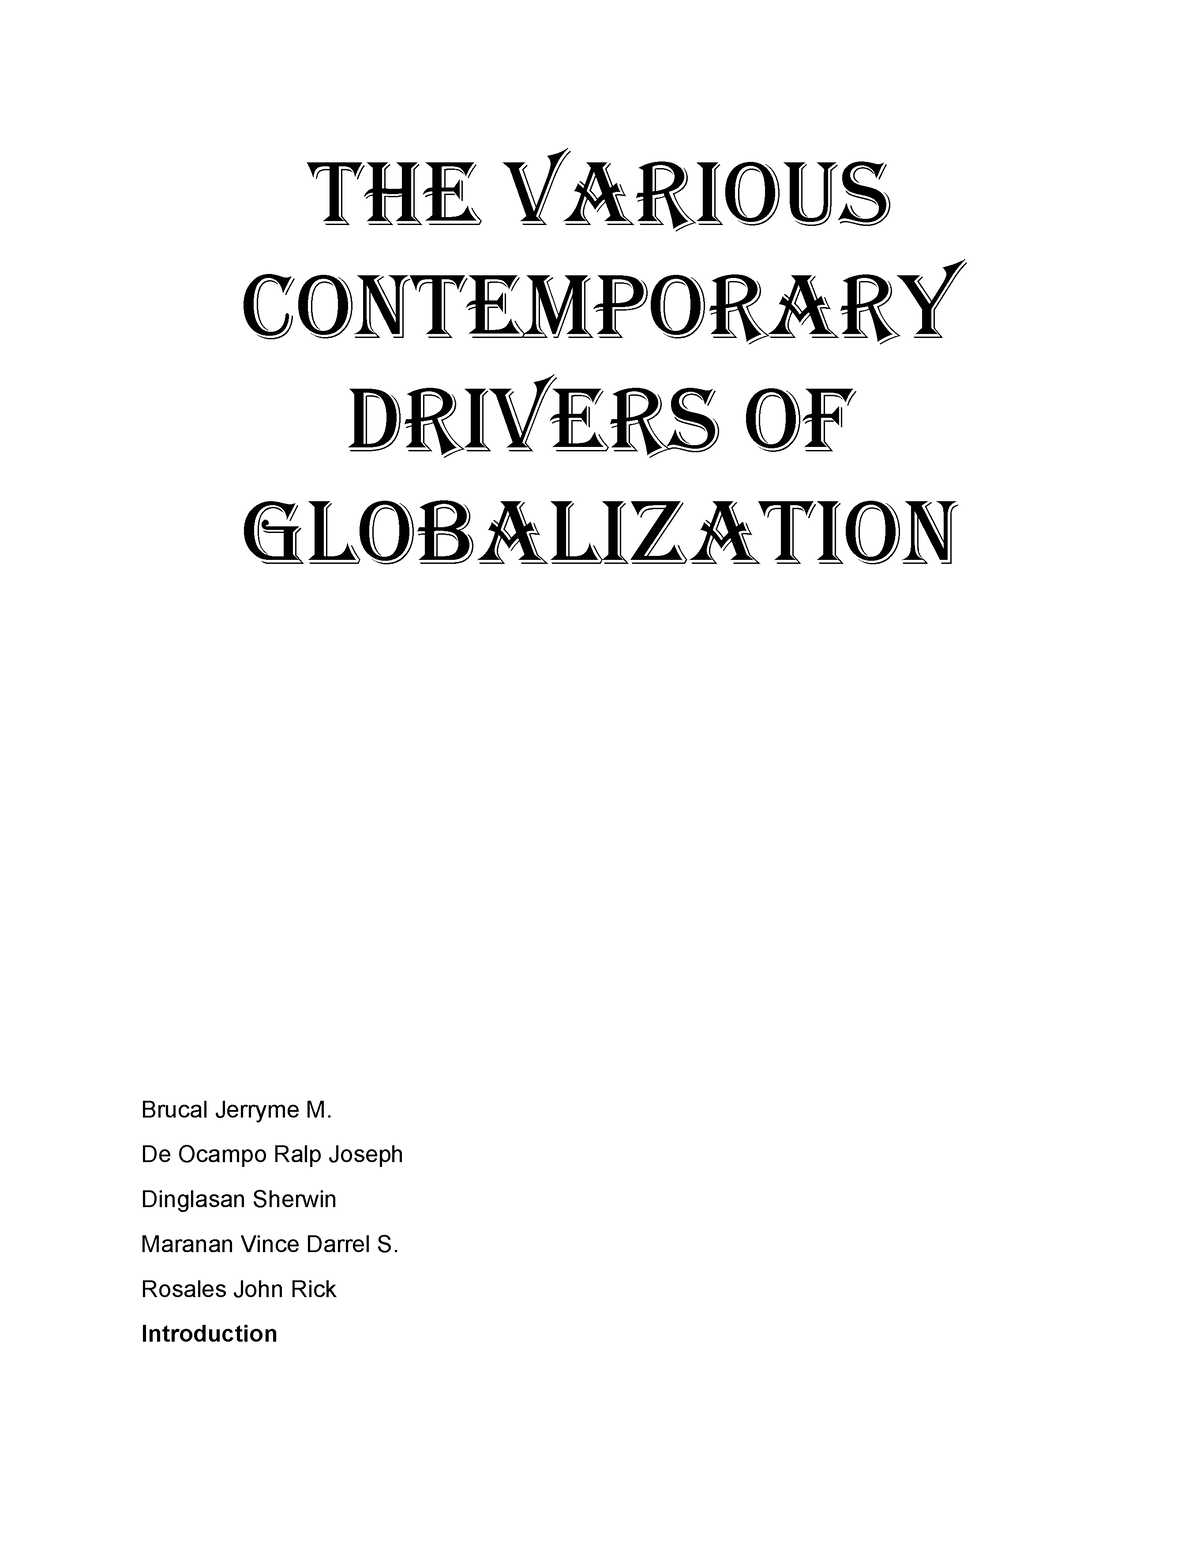 the main drivers of globalization